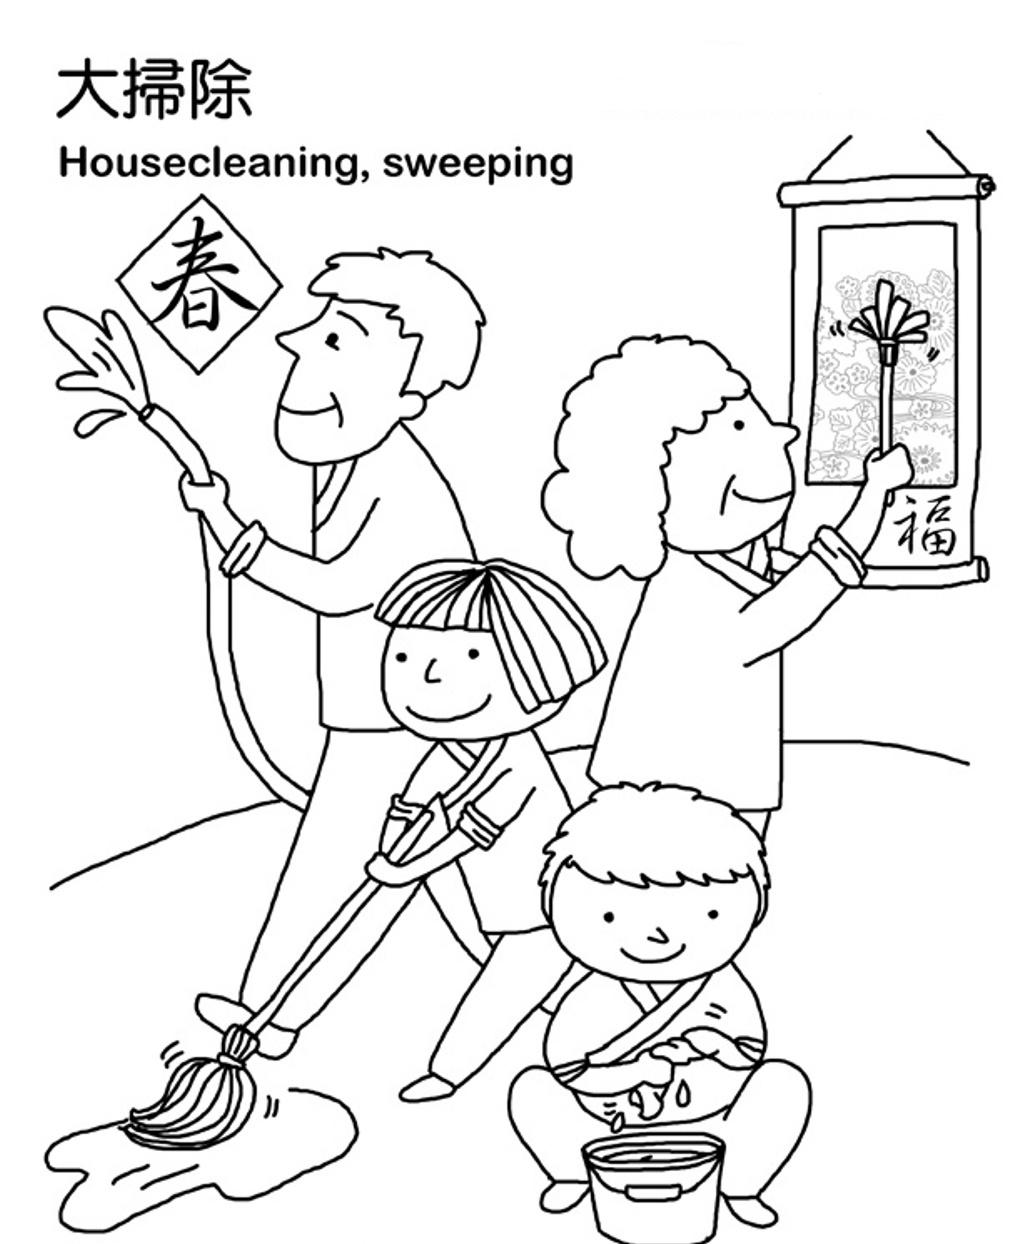 Chinese New Year S Cleaning The Housec0e0 Coloring Page